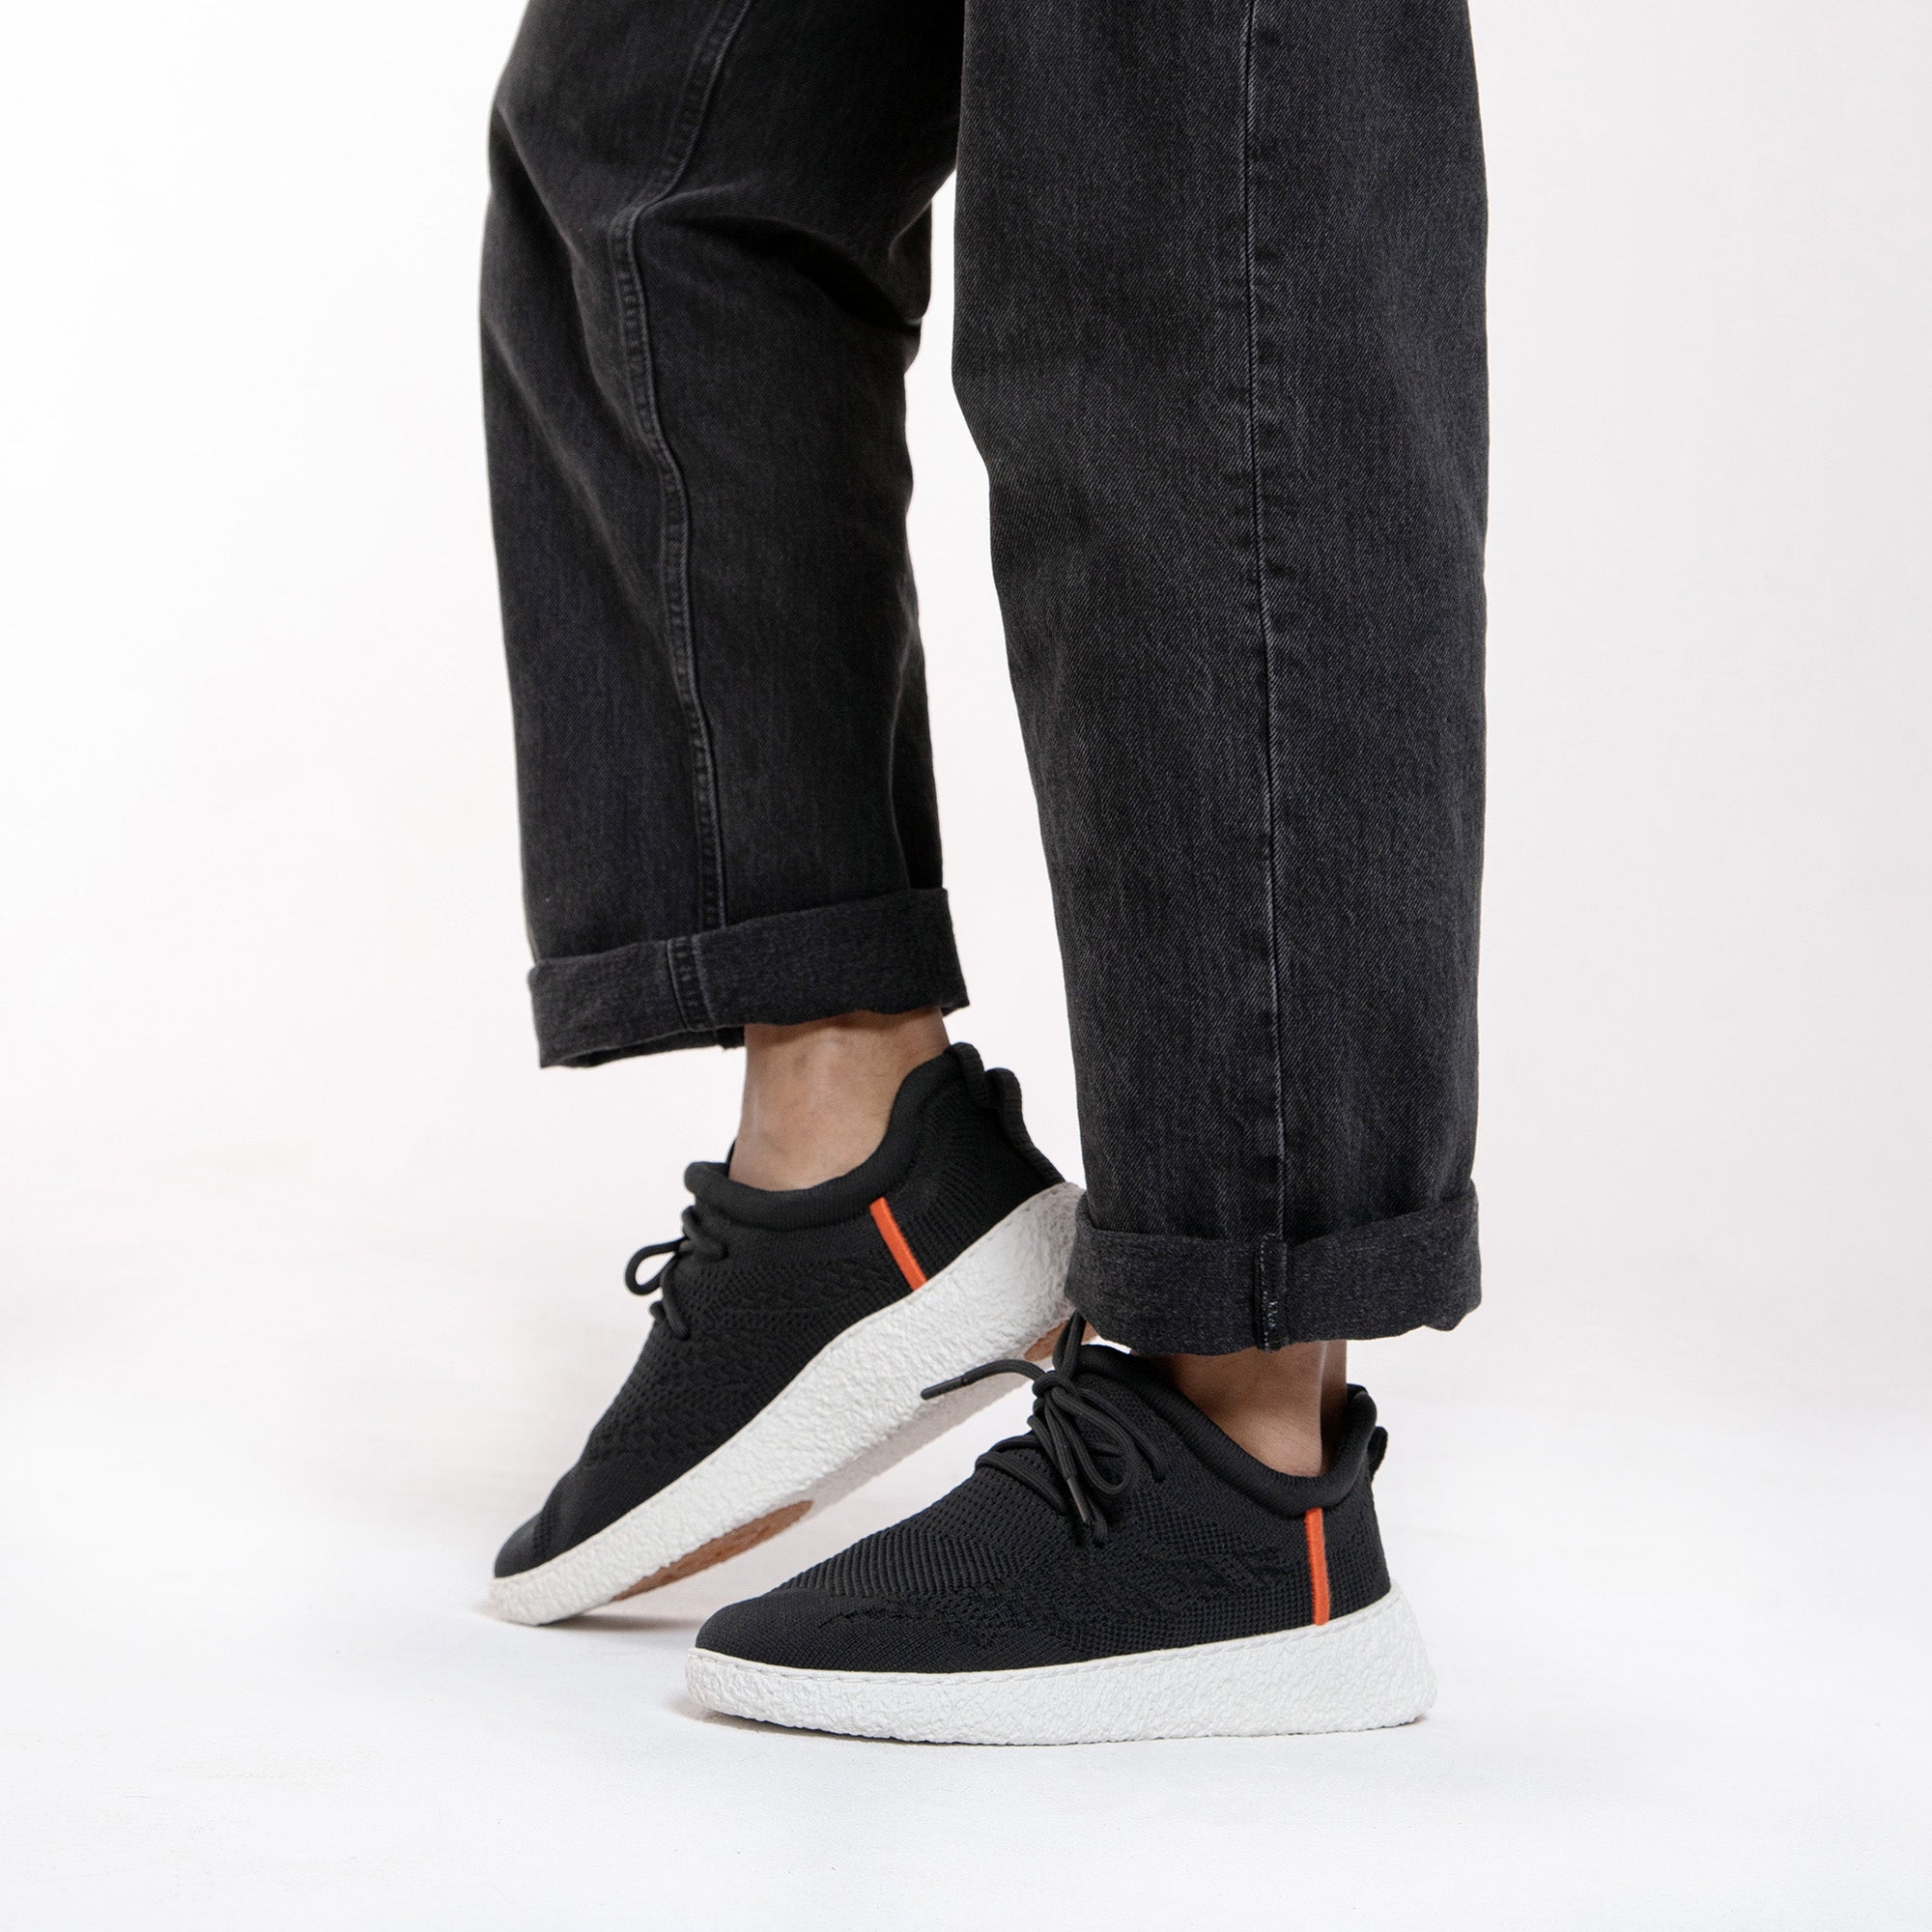 Baliston shoes on person wearing black jeans.